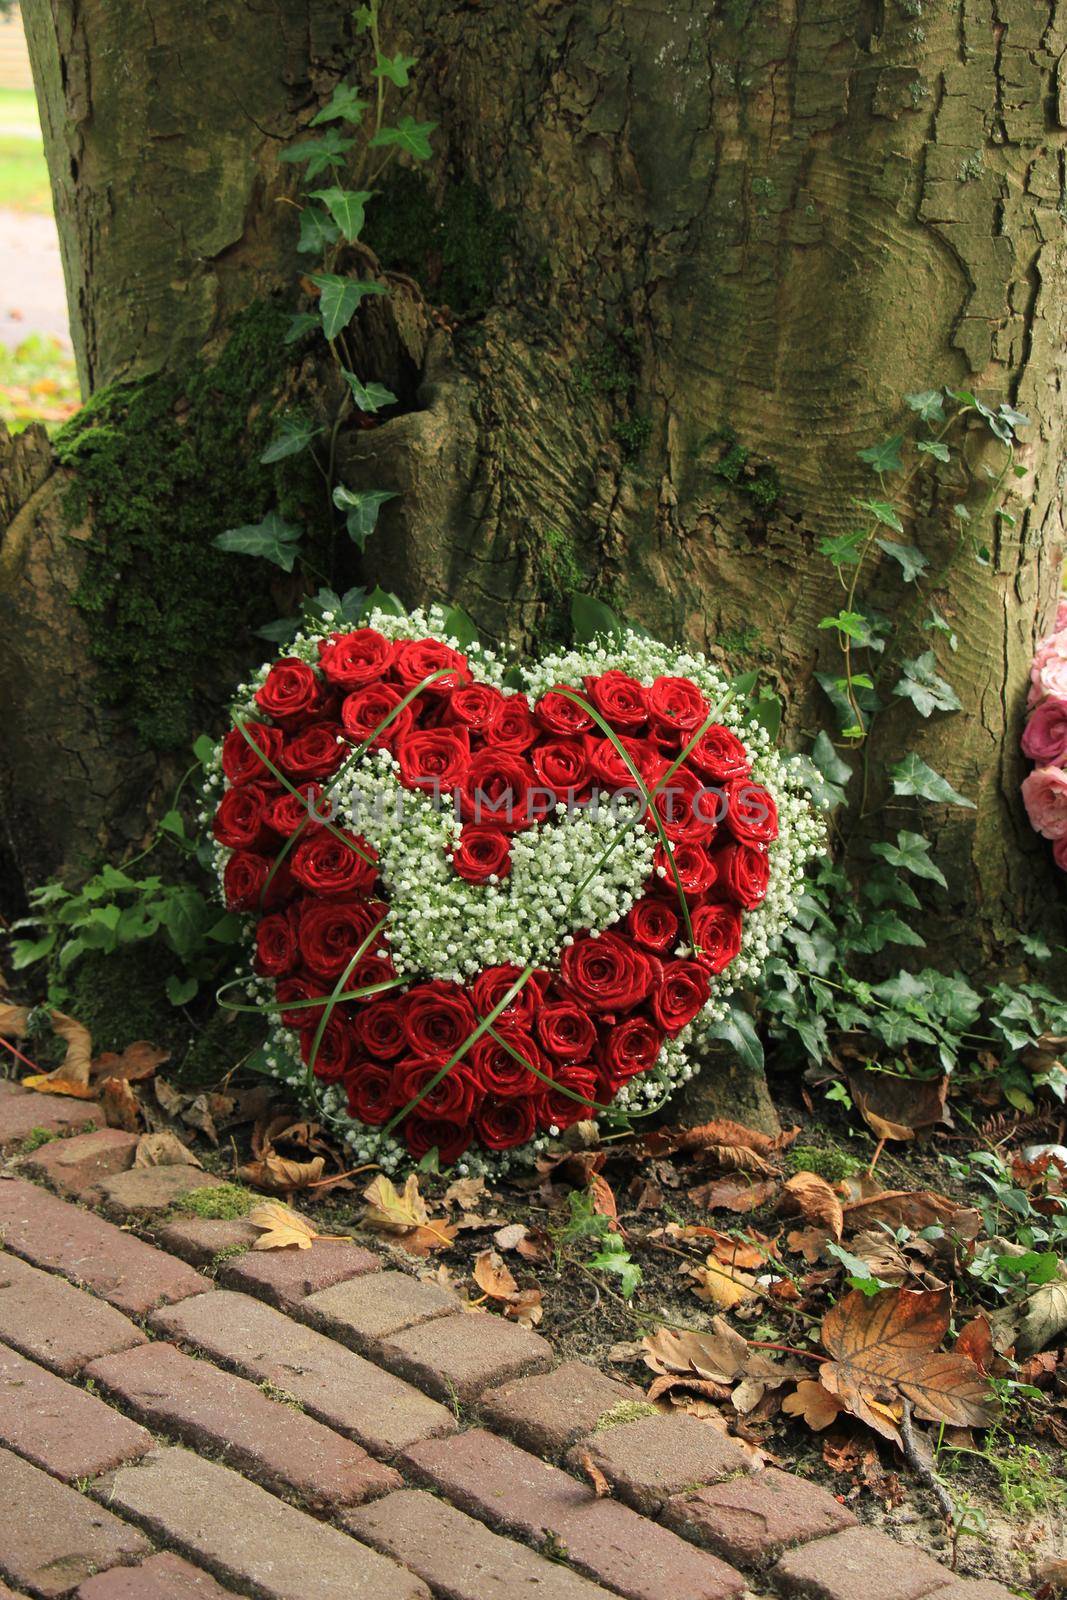 Heart shaped sympathy flowers  or funeral flowers near a tree, red roses